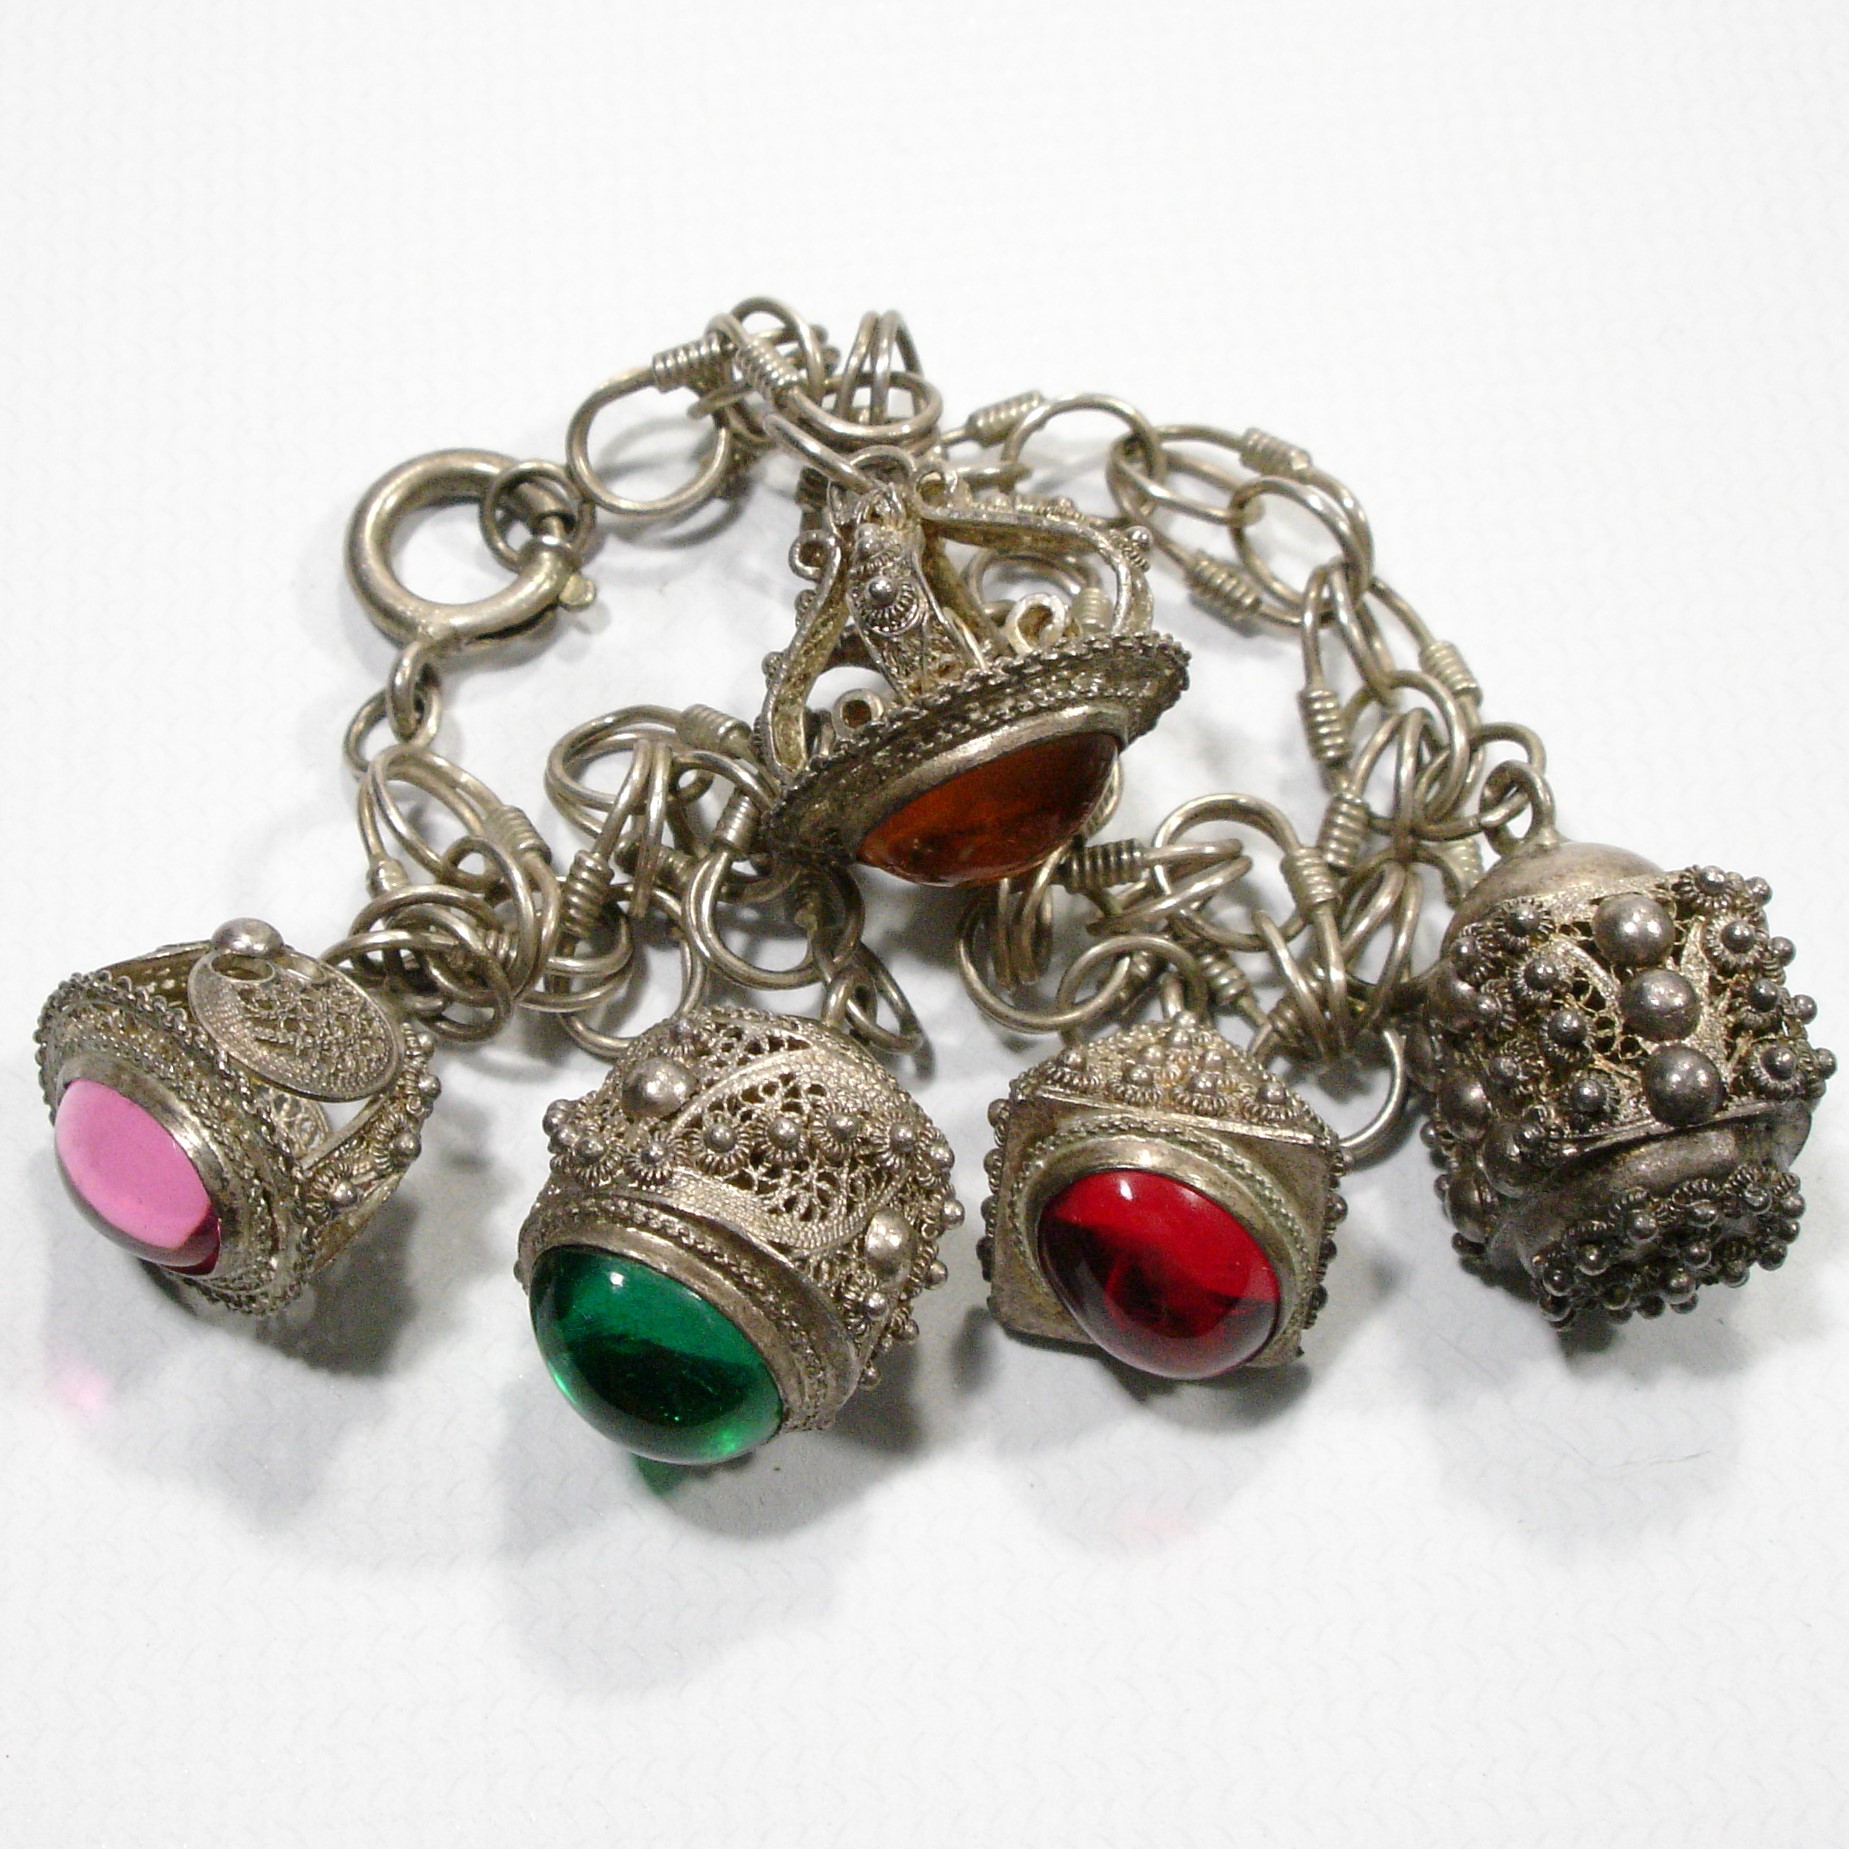 Etruscan Revival 800 Sterling Charm Bracelet with Ten Different Charms